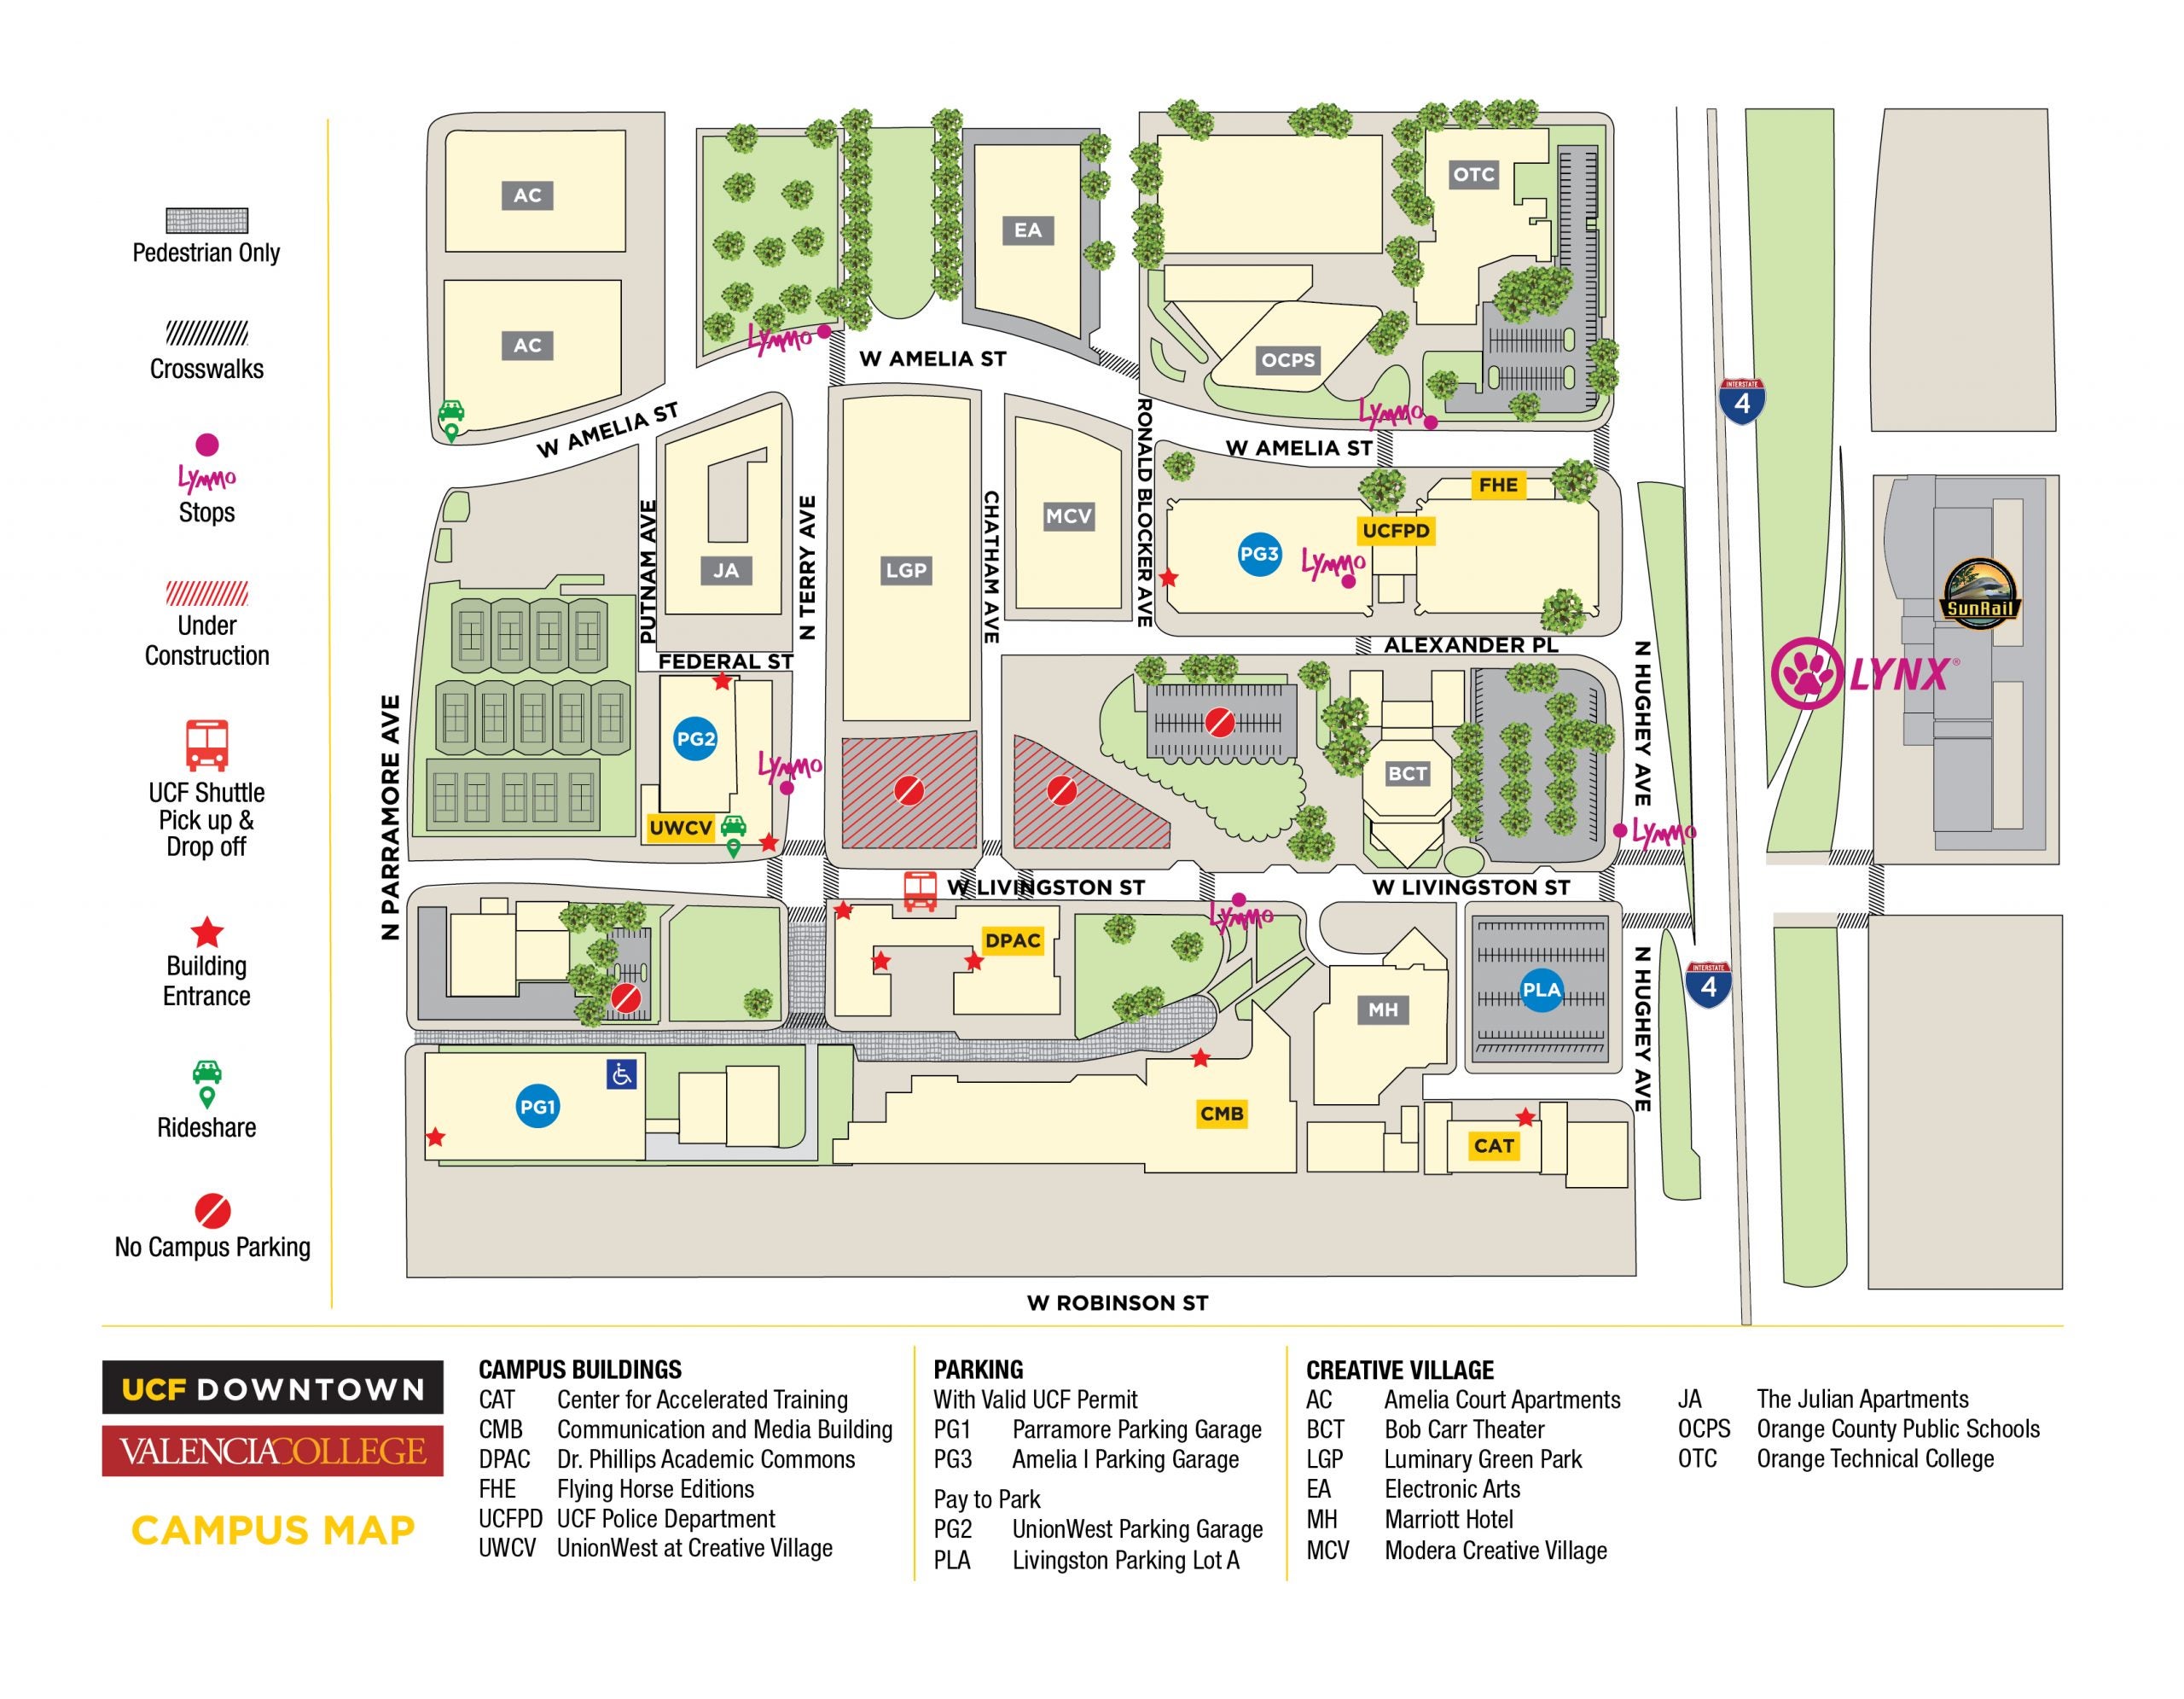 Link to scaled version of downtown campus map